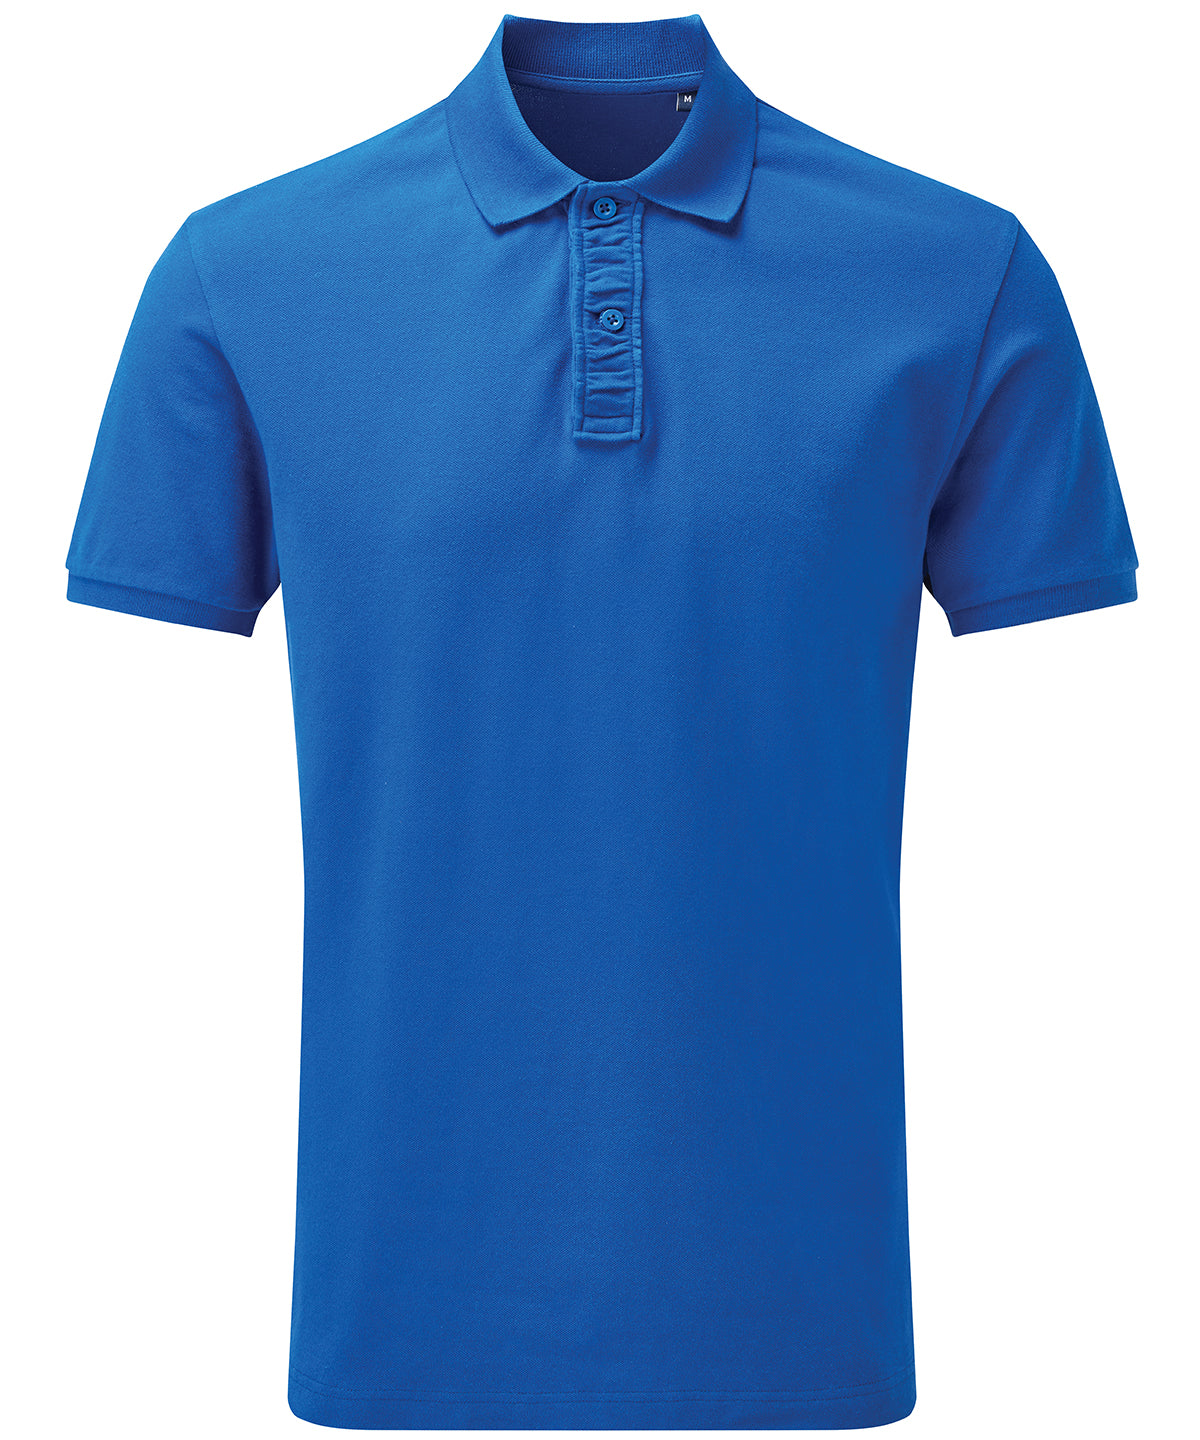 Personalised Polo Shirts - Royal Asquith & Fox Men's "infinity stretch" polo